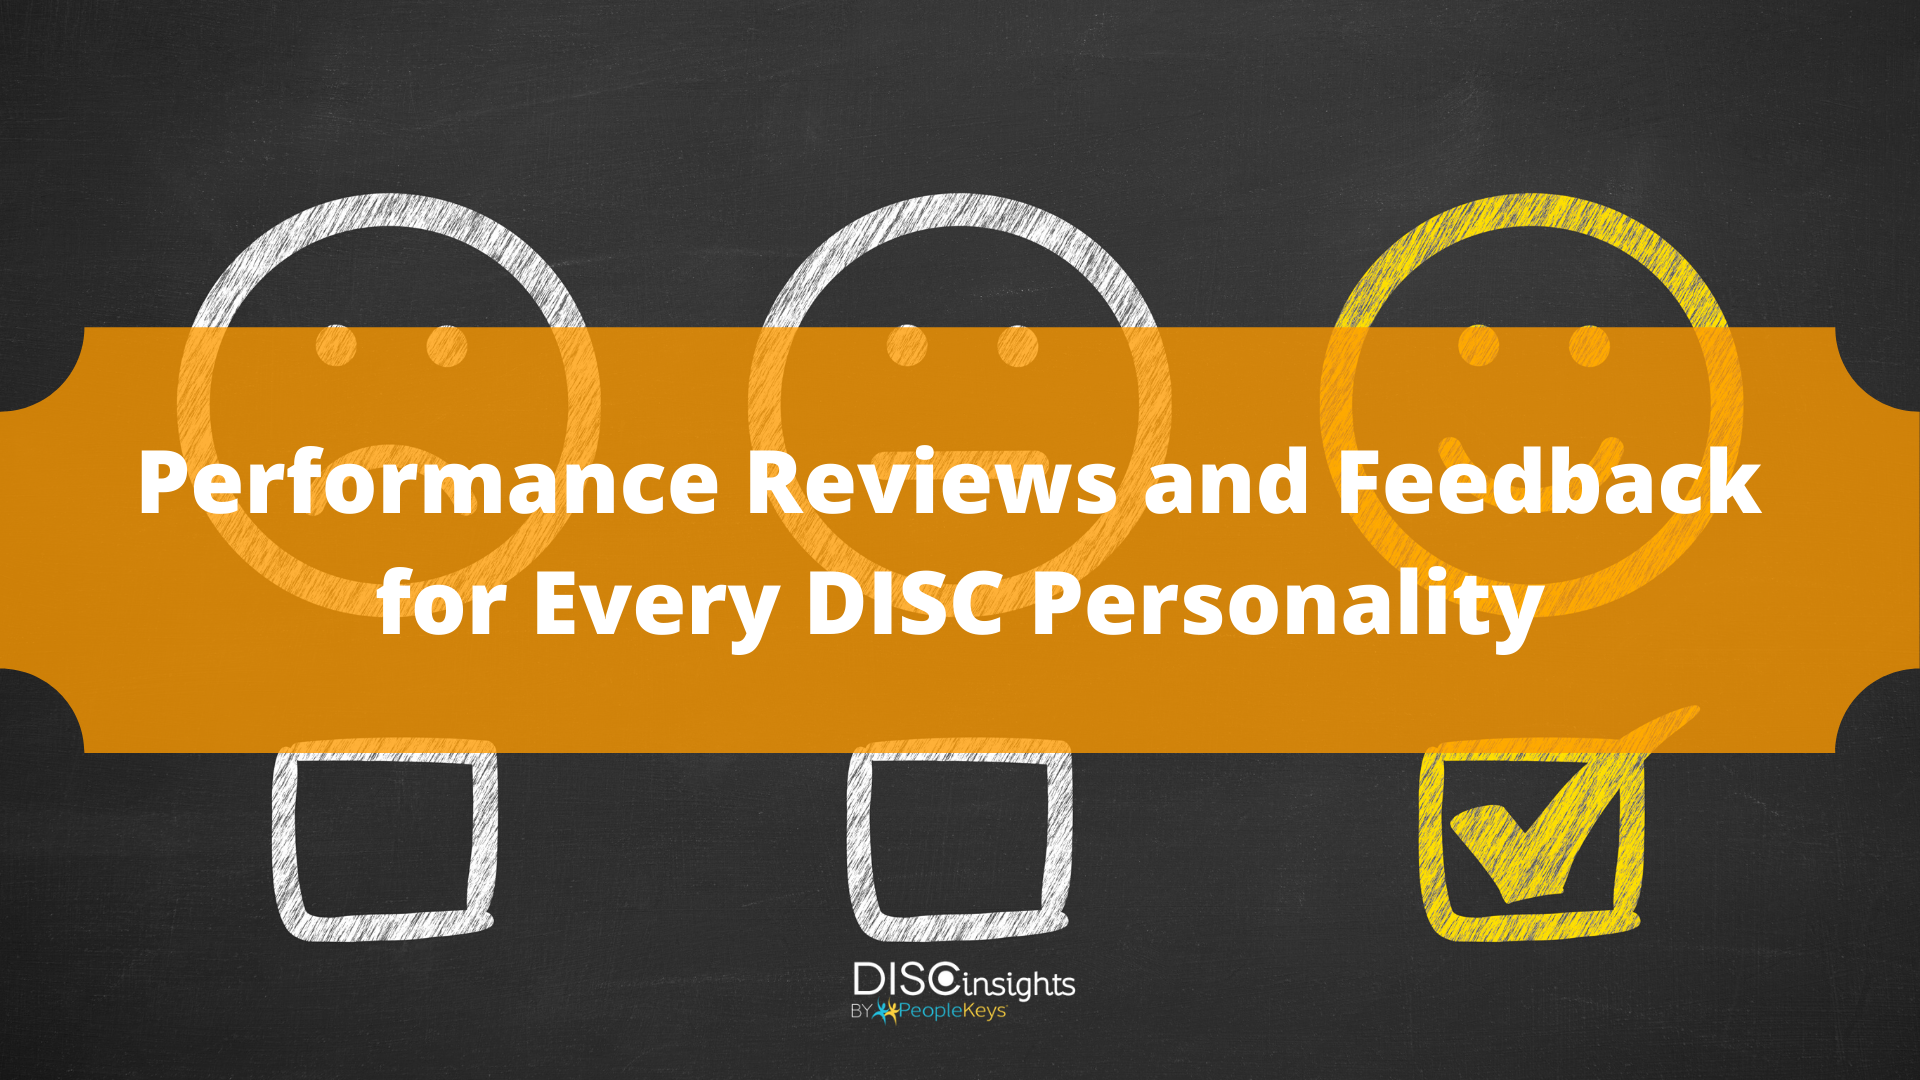 Performance Reviews and Feedback for Every DISC Personality